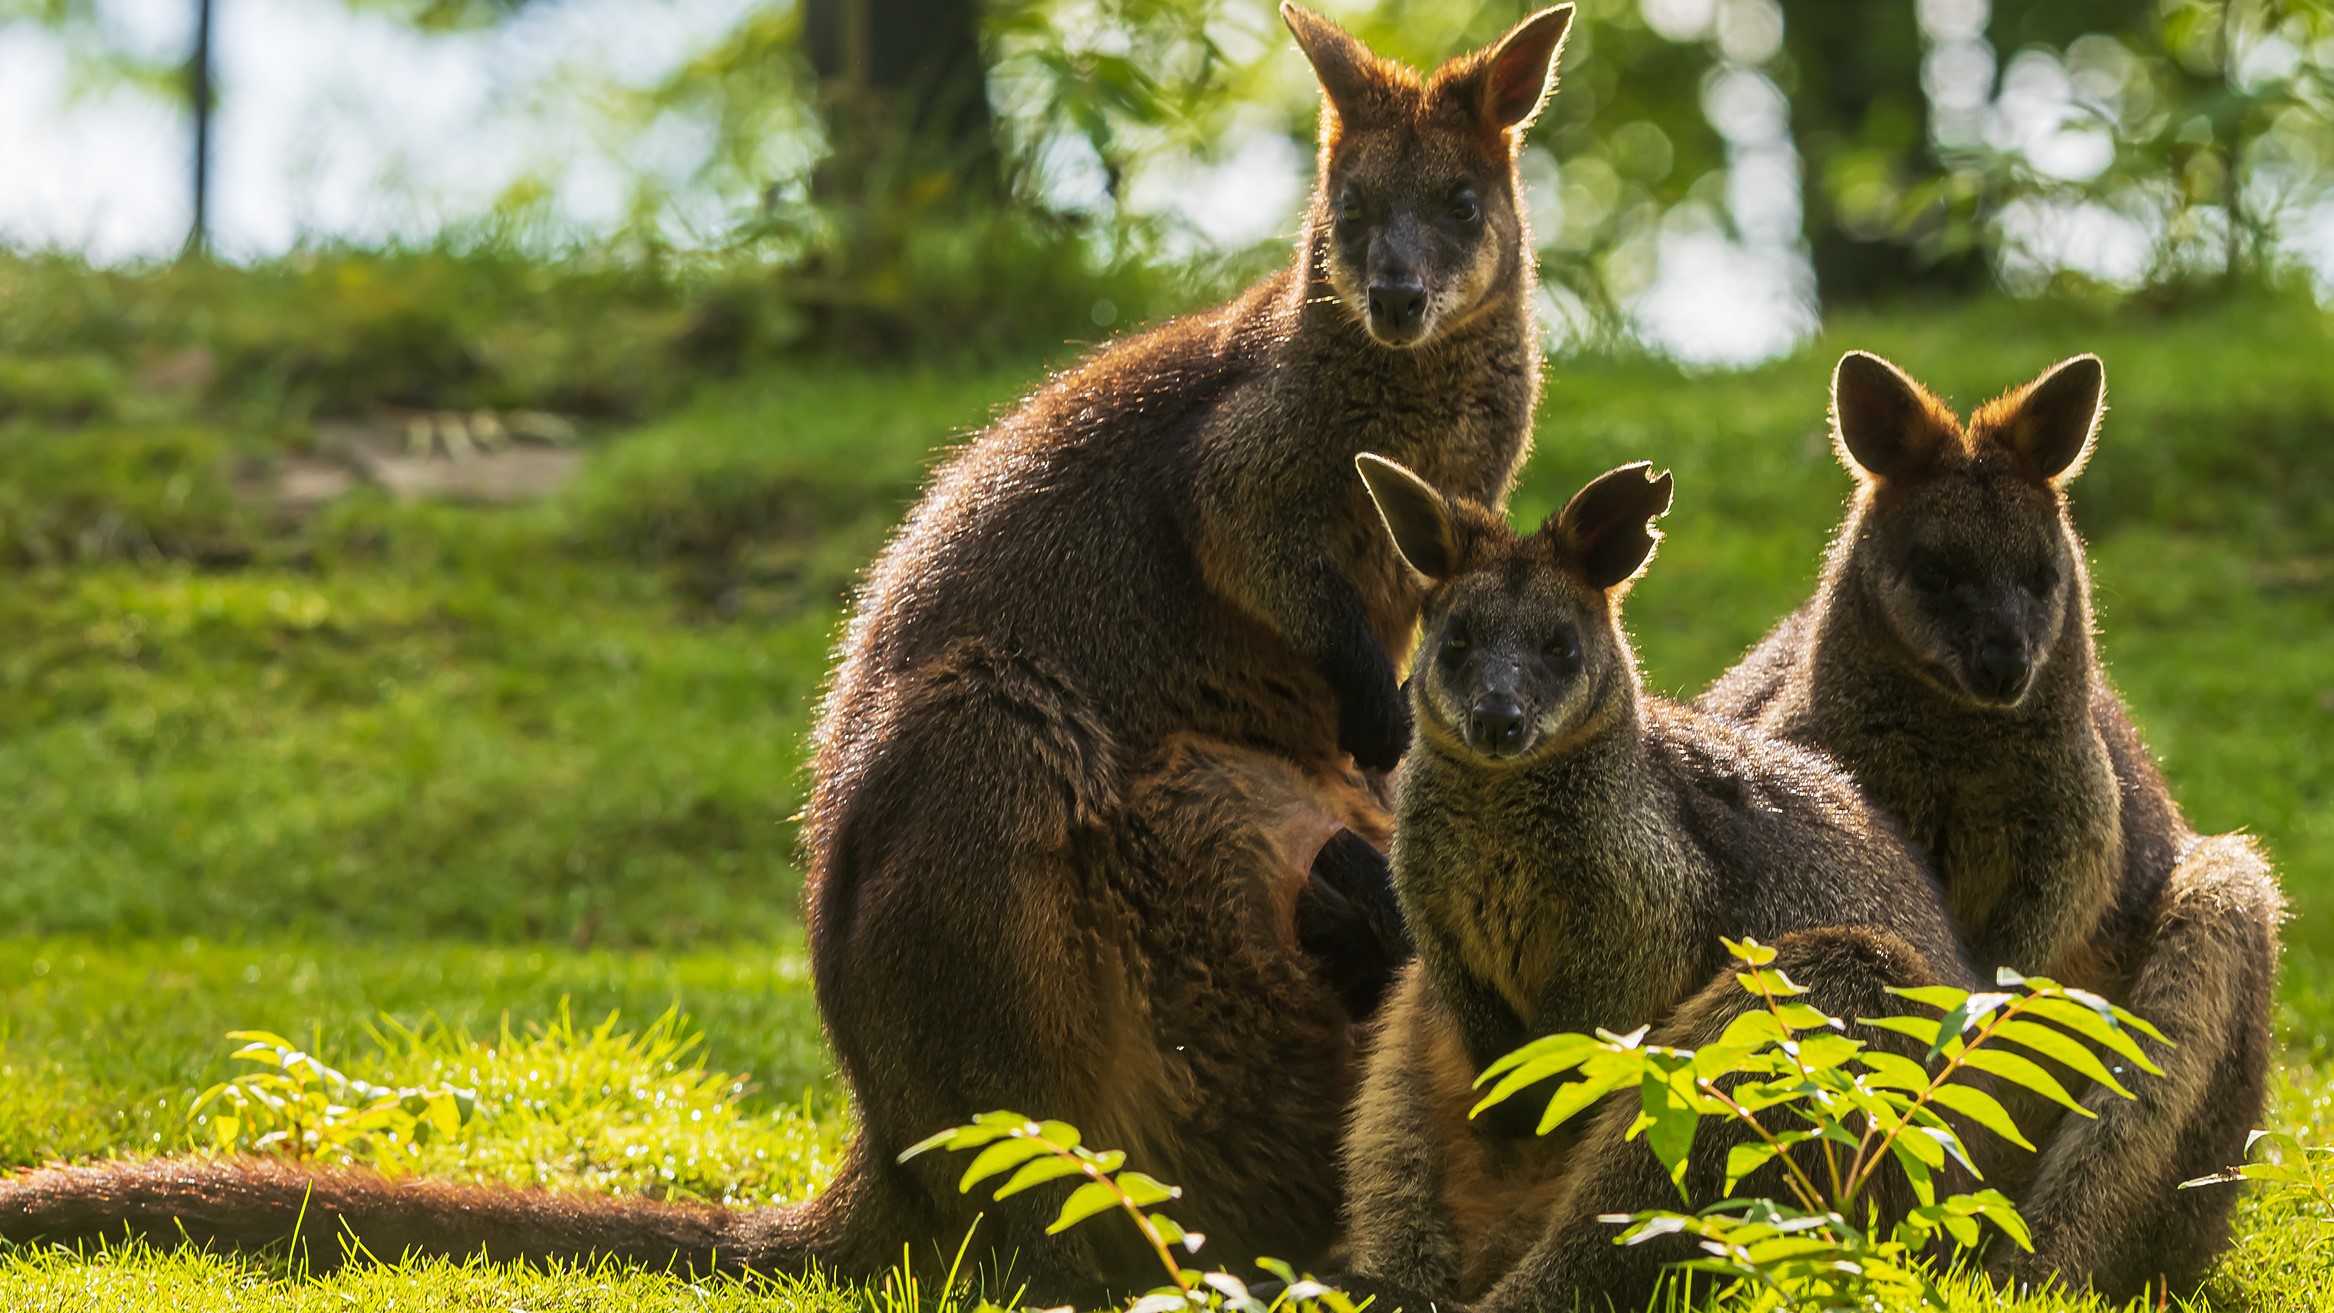 Fake news for wallabies (and elephants): animals ‘led by the nose’ to leave plants alone